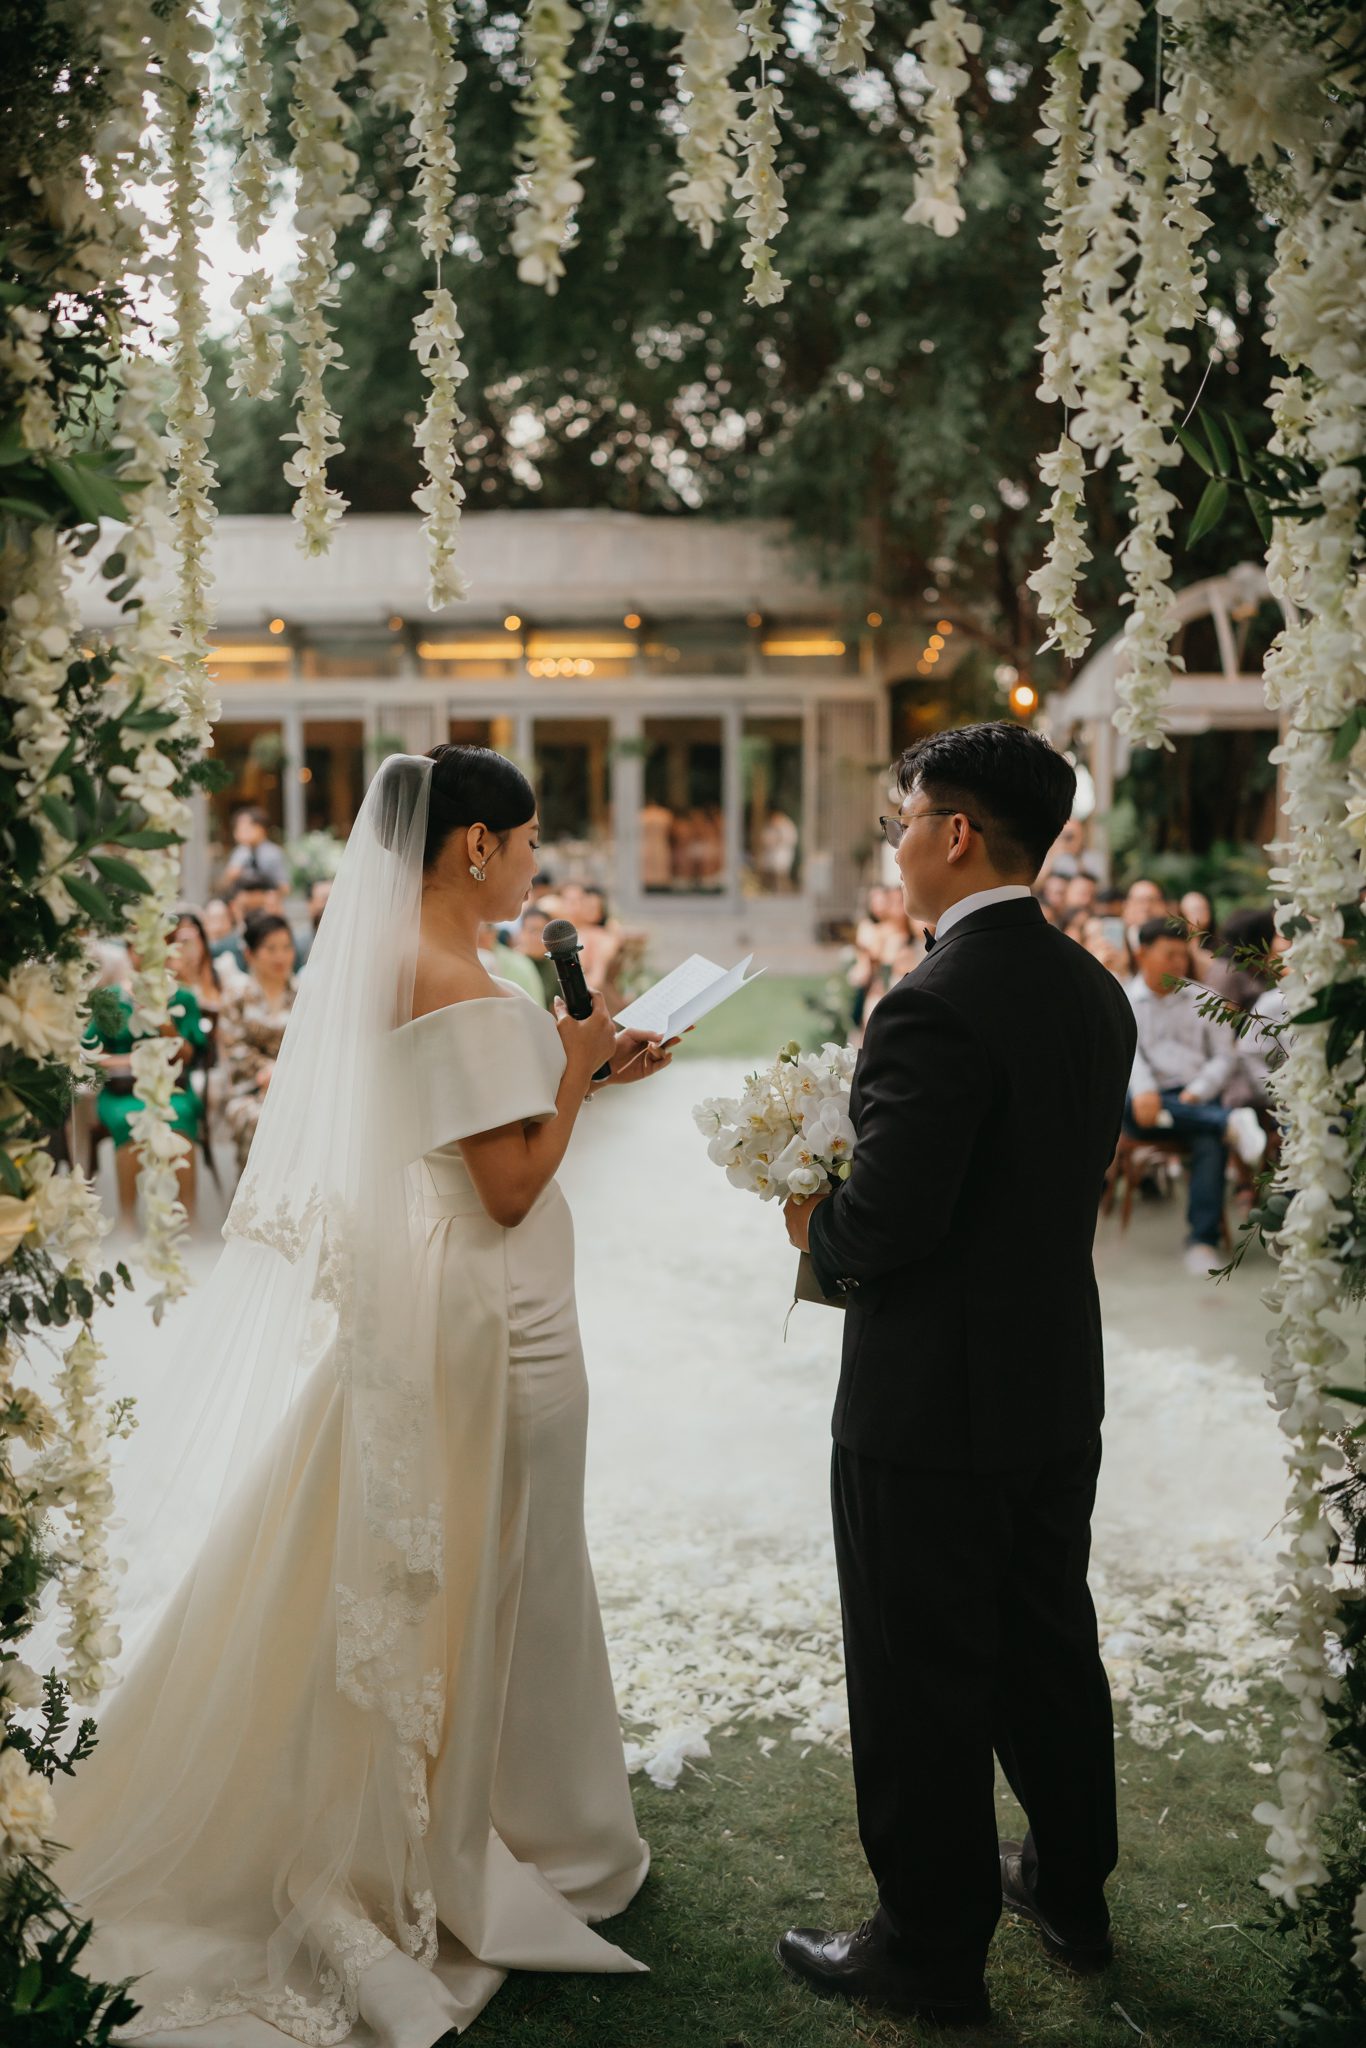 Saigon intimate wedding at An Lam Retreat 4580 - The Planners